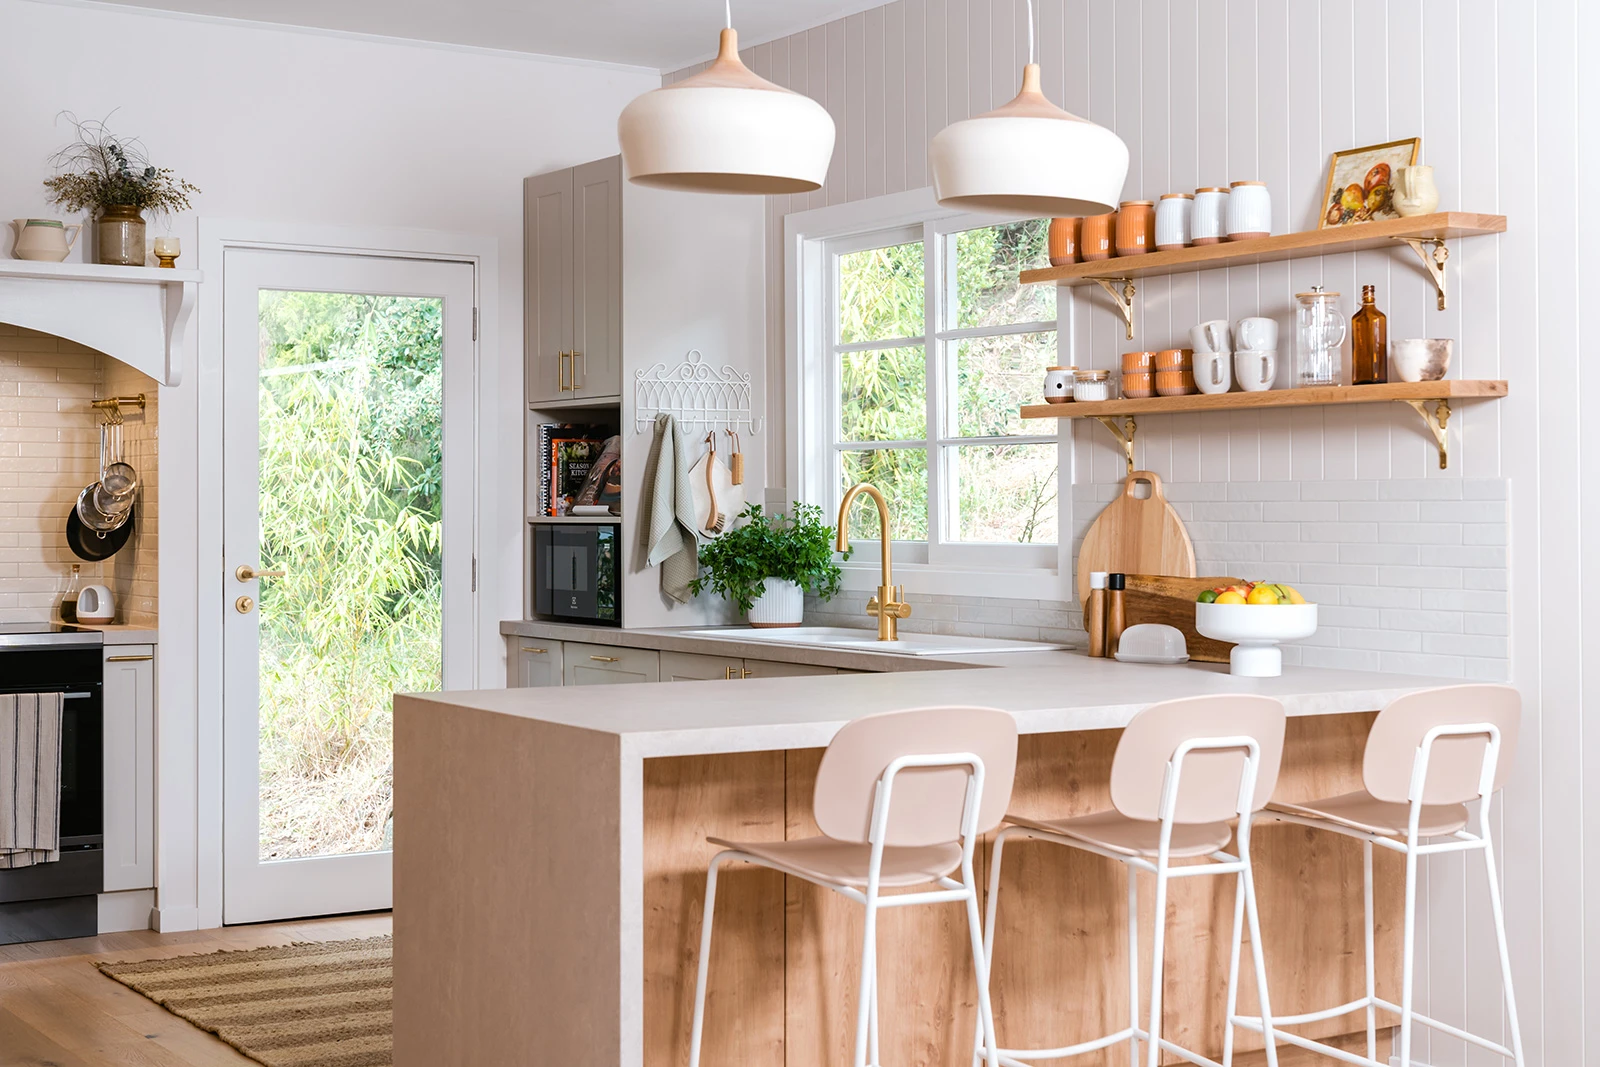 White kitchen interior with timber bench and pendant lighting